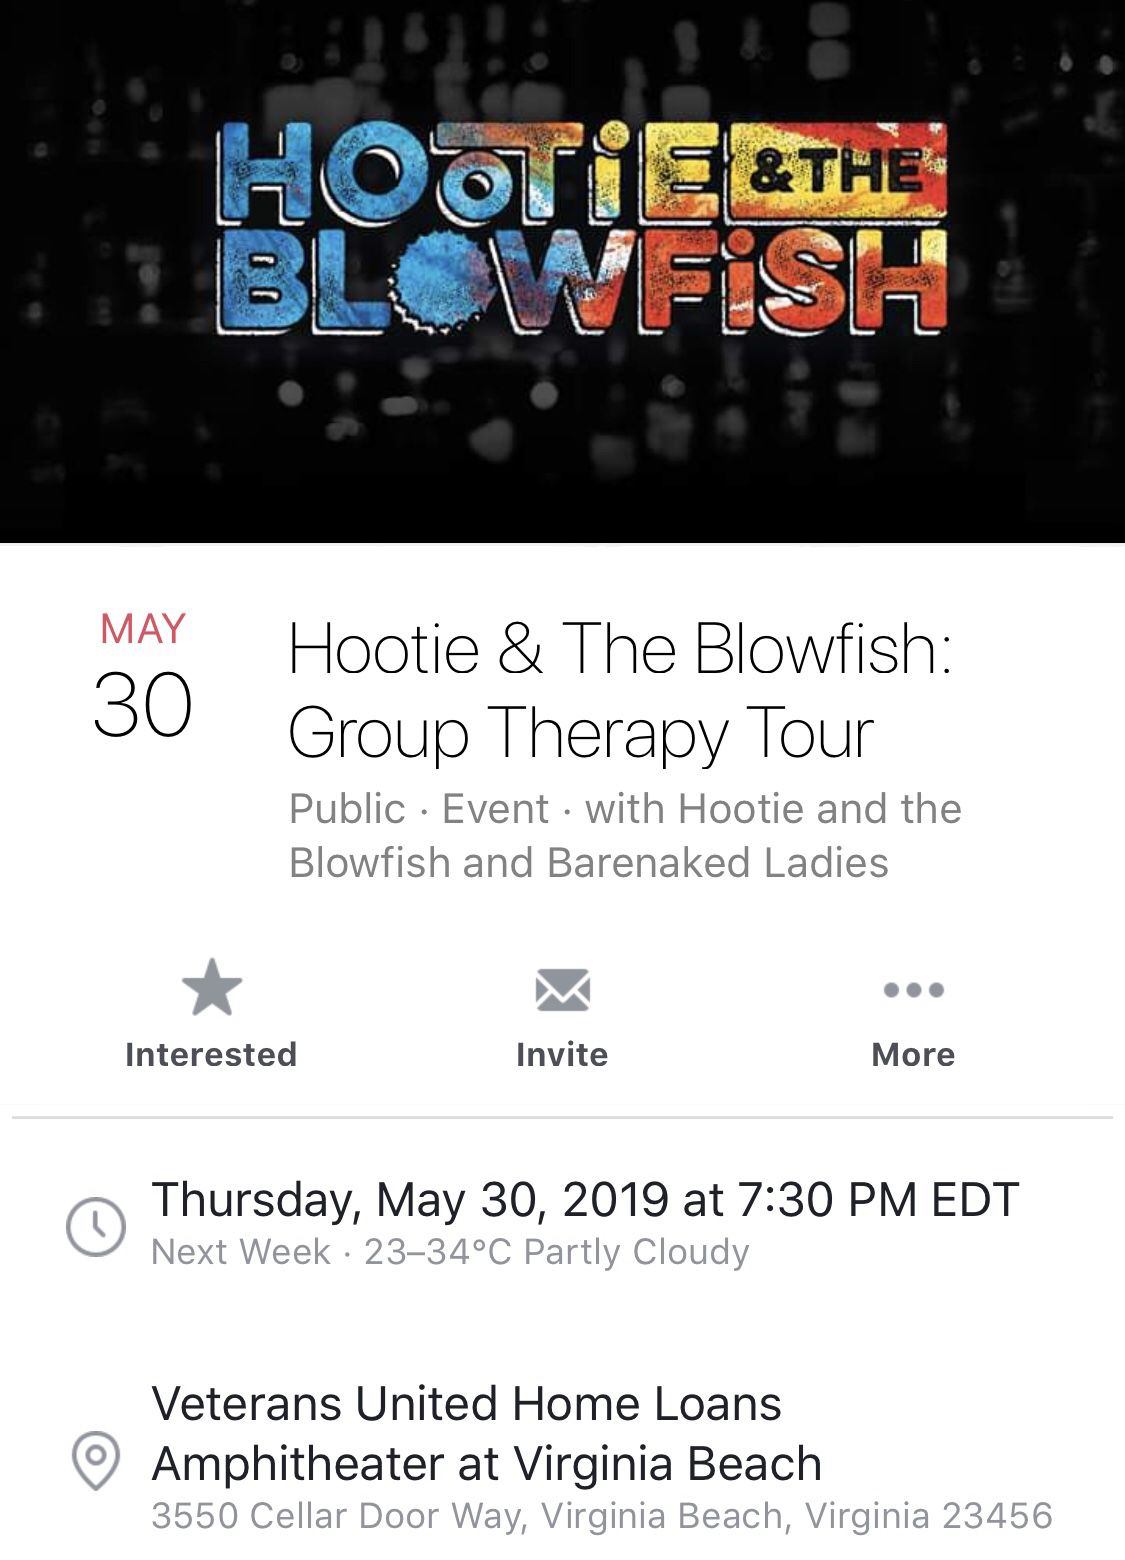 4 Hootie & the Blowfish concert tickets LAWN